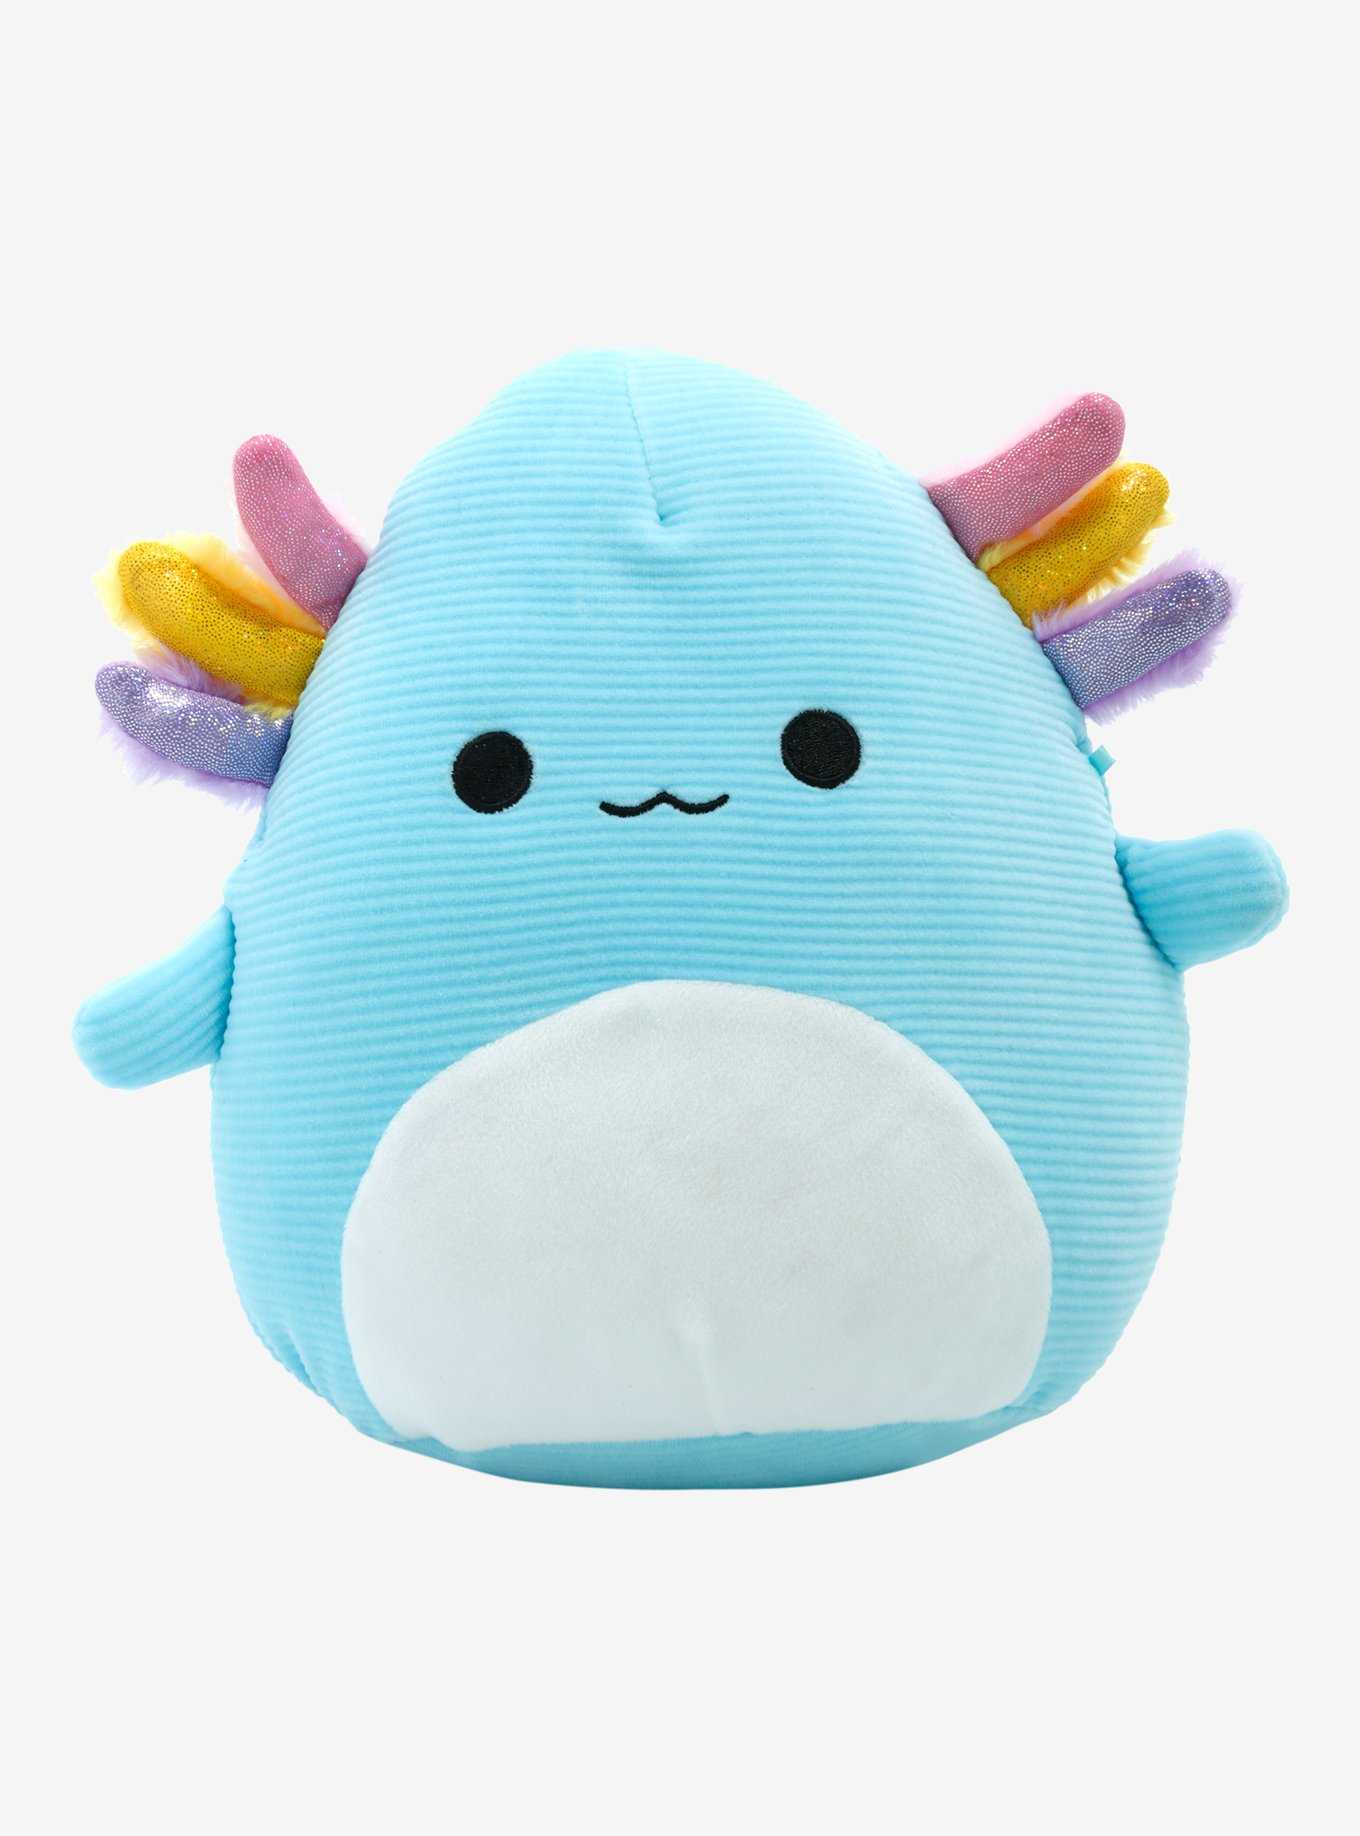 Squishmallows Official Kellytoys Plush 8 Inch Nash the Green Broccoli  Vegetable Food Squad Ultimate Soft Plush Stuffed Toy